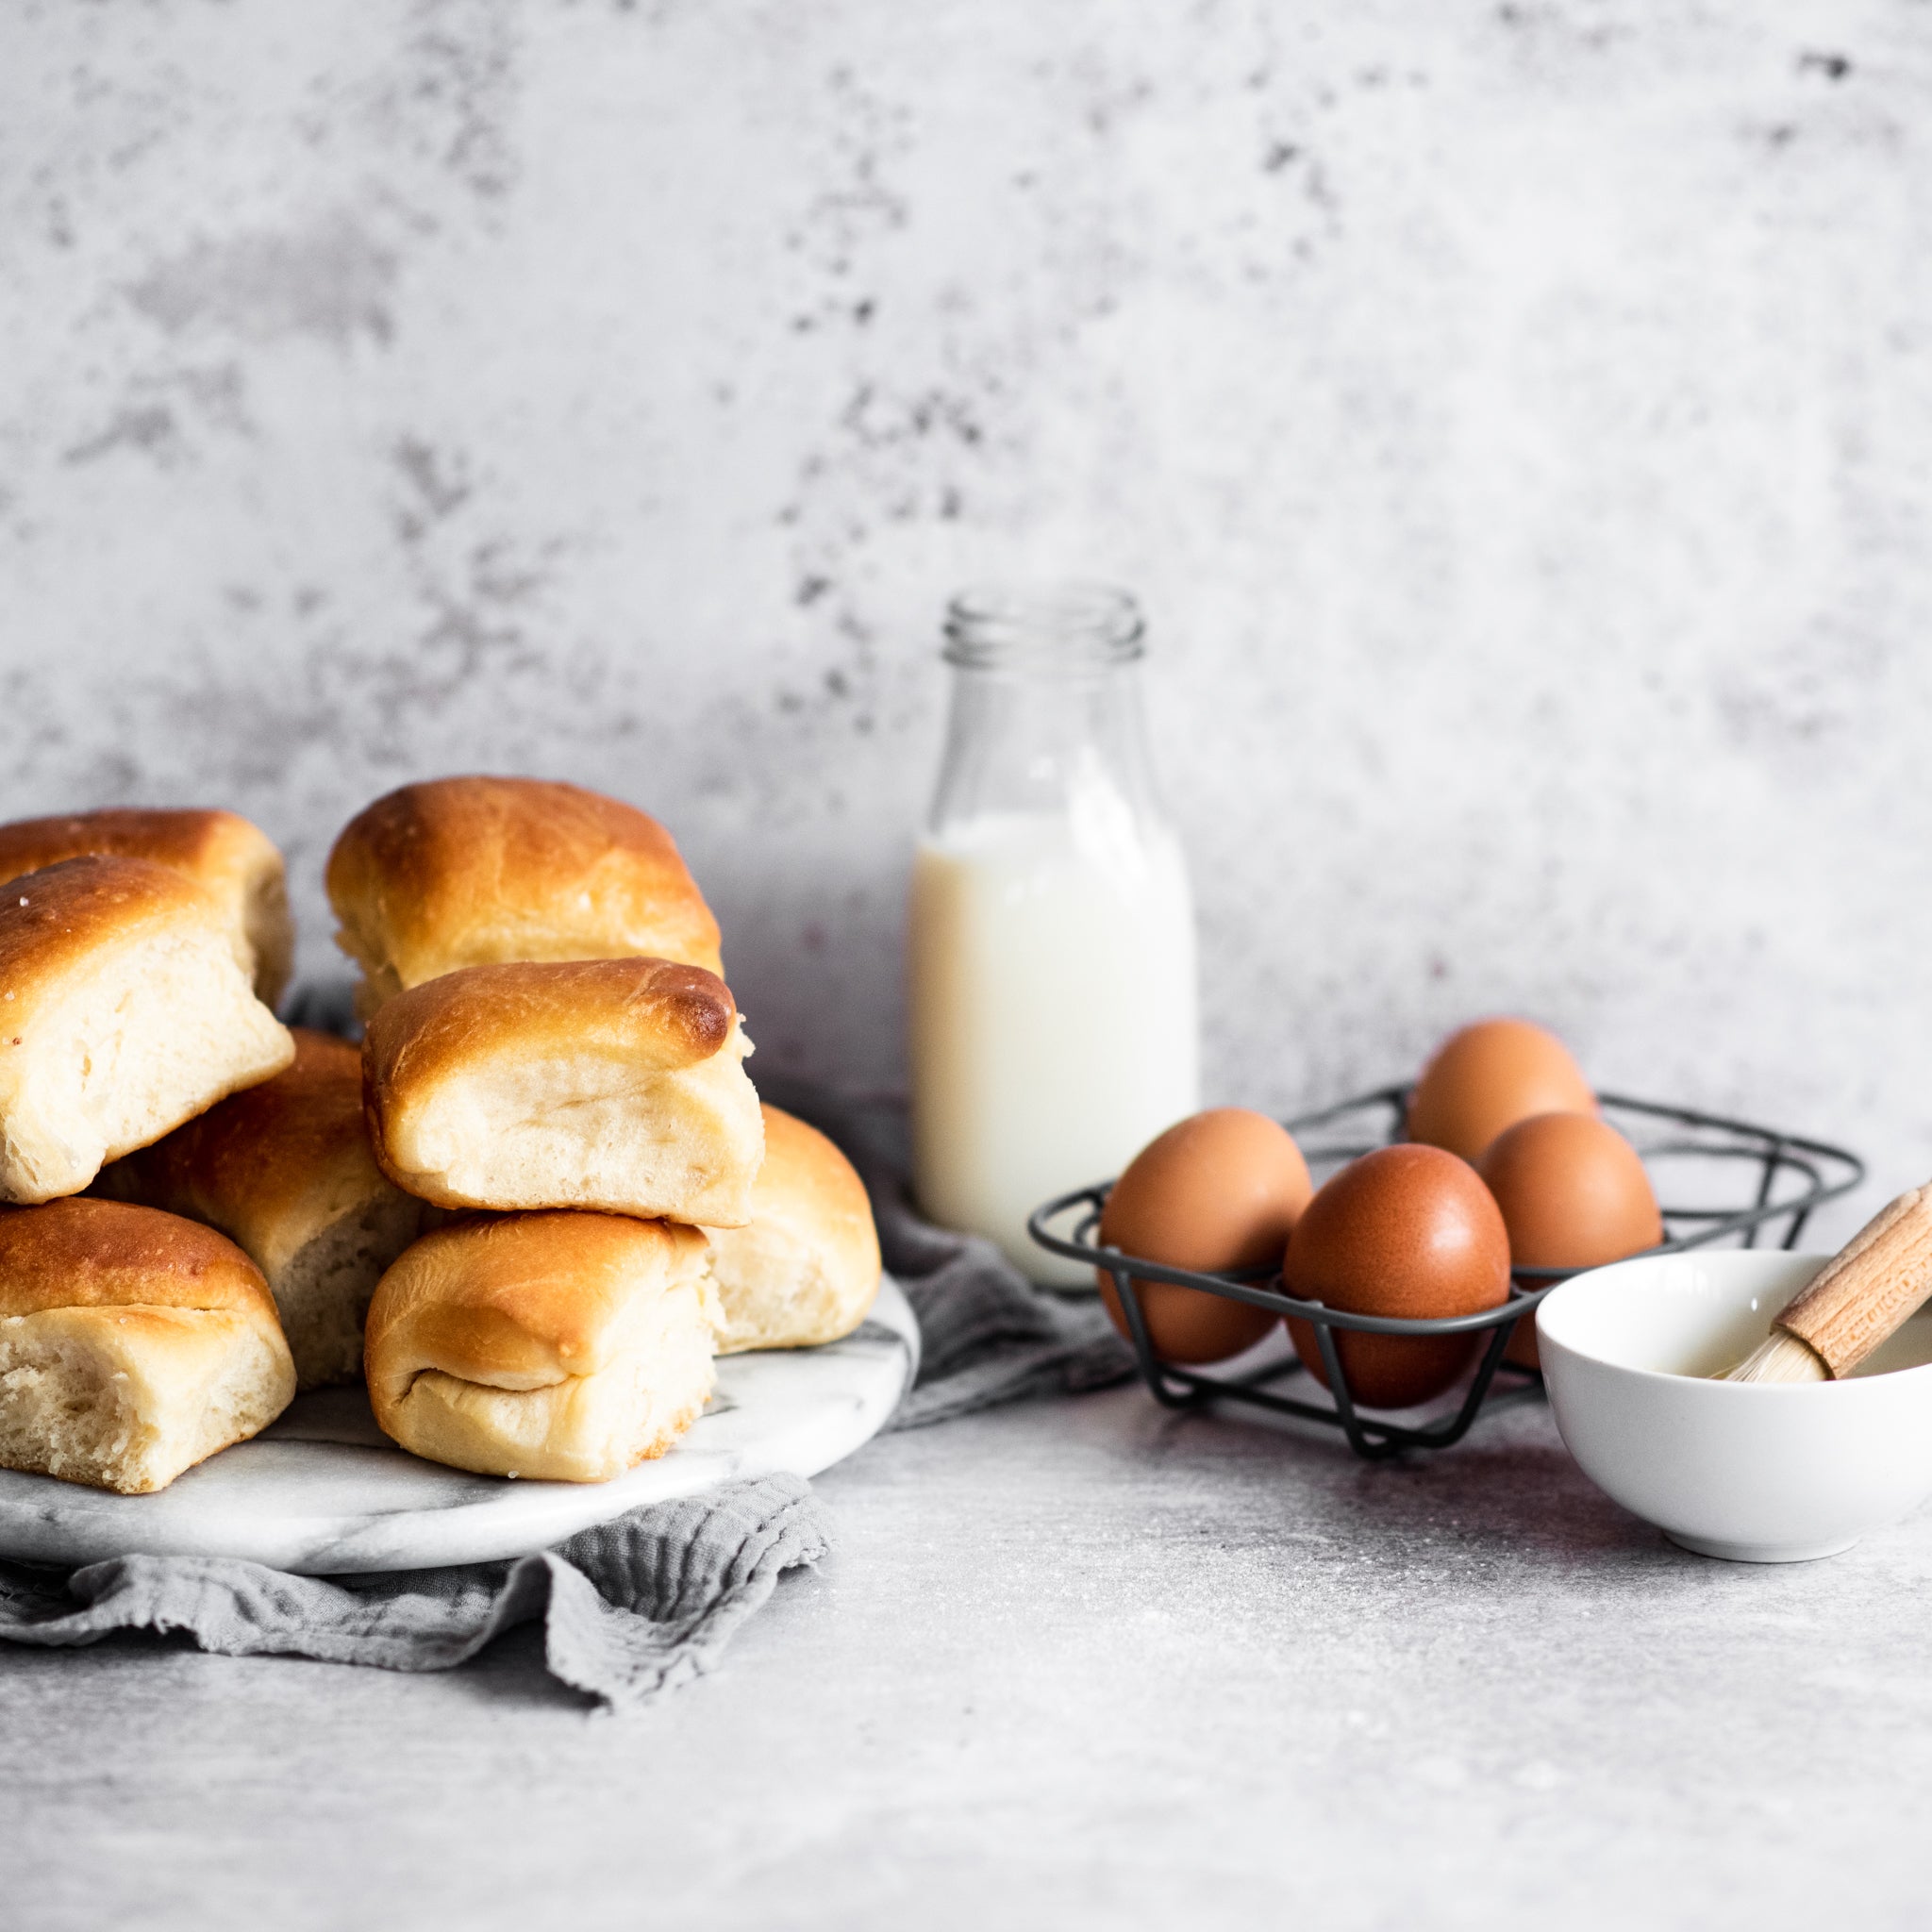  bread rolls on a plate with eggs and milk